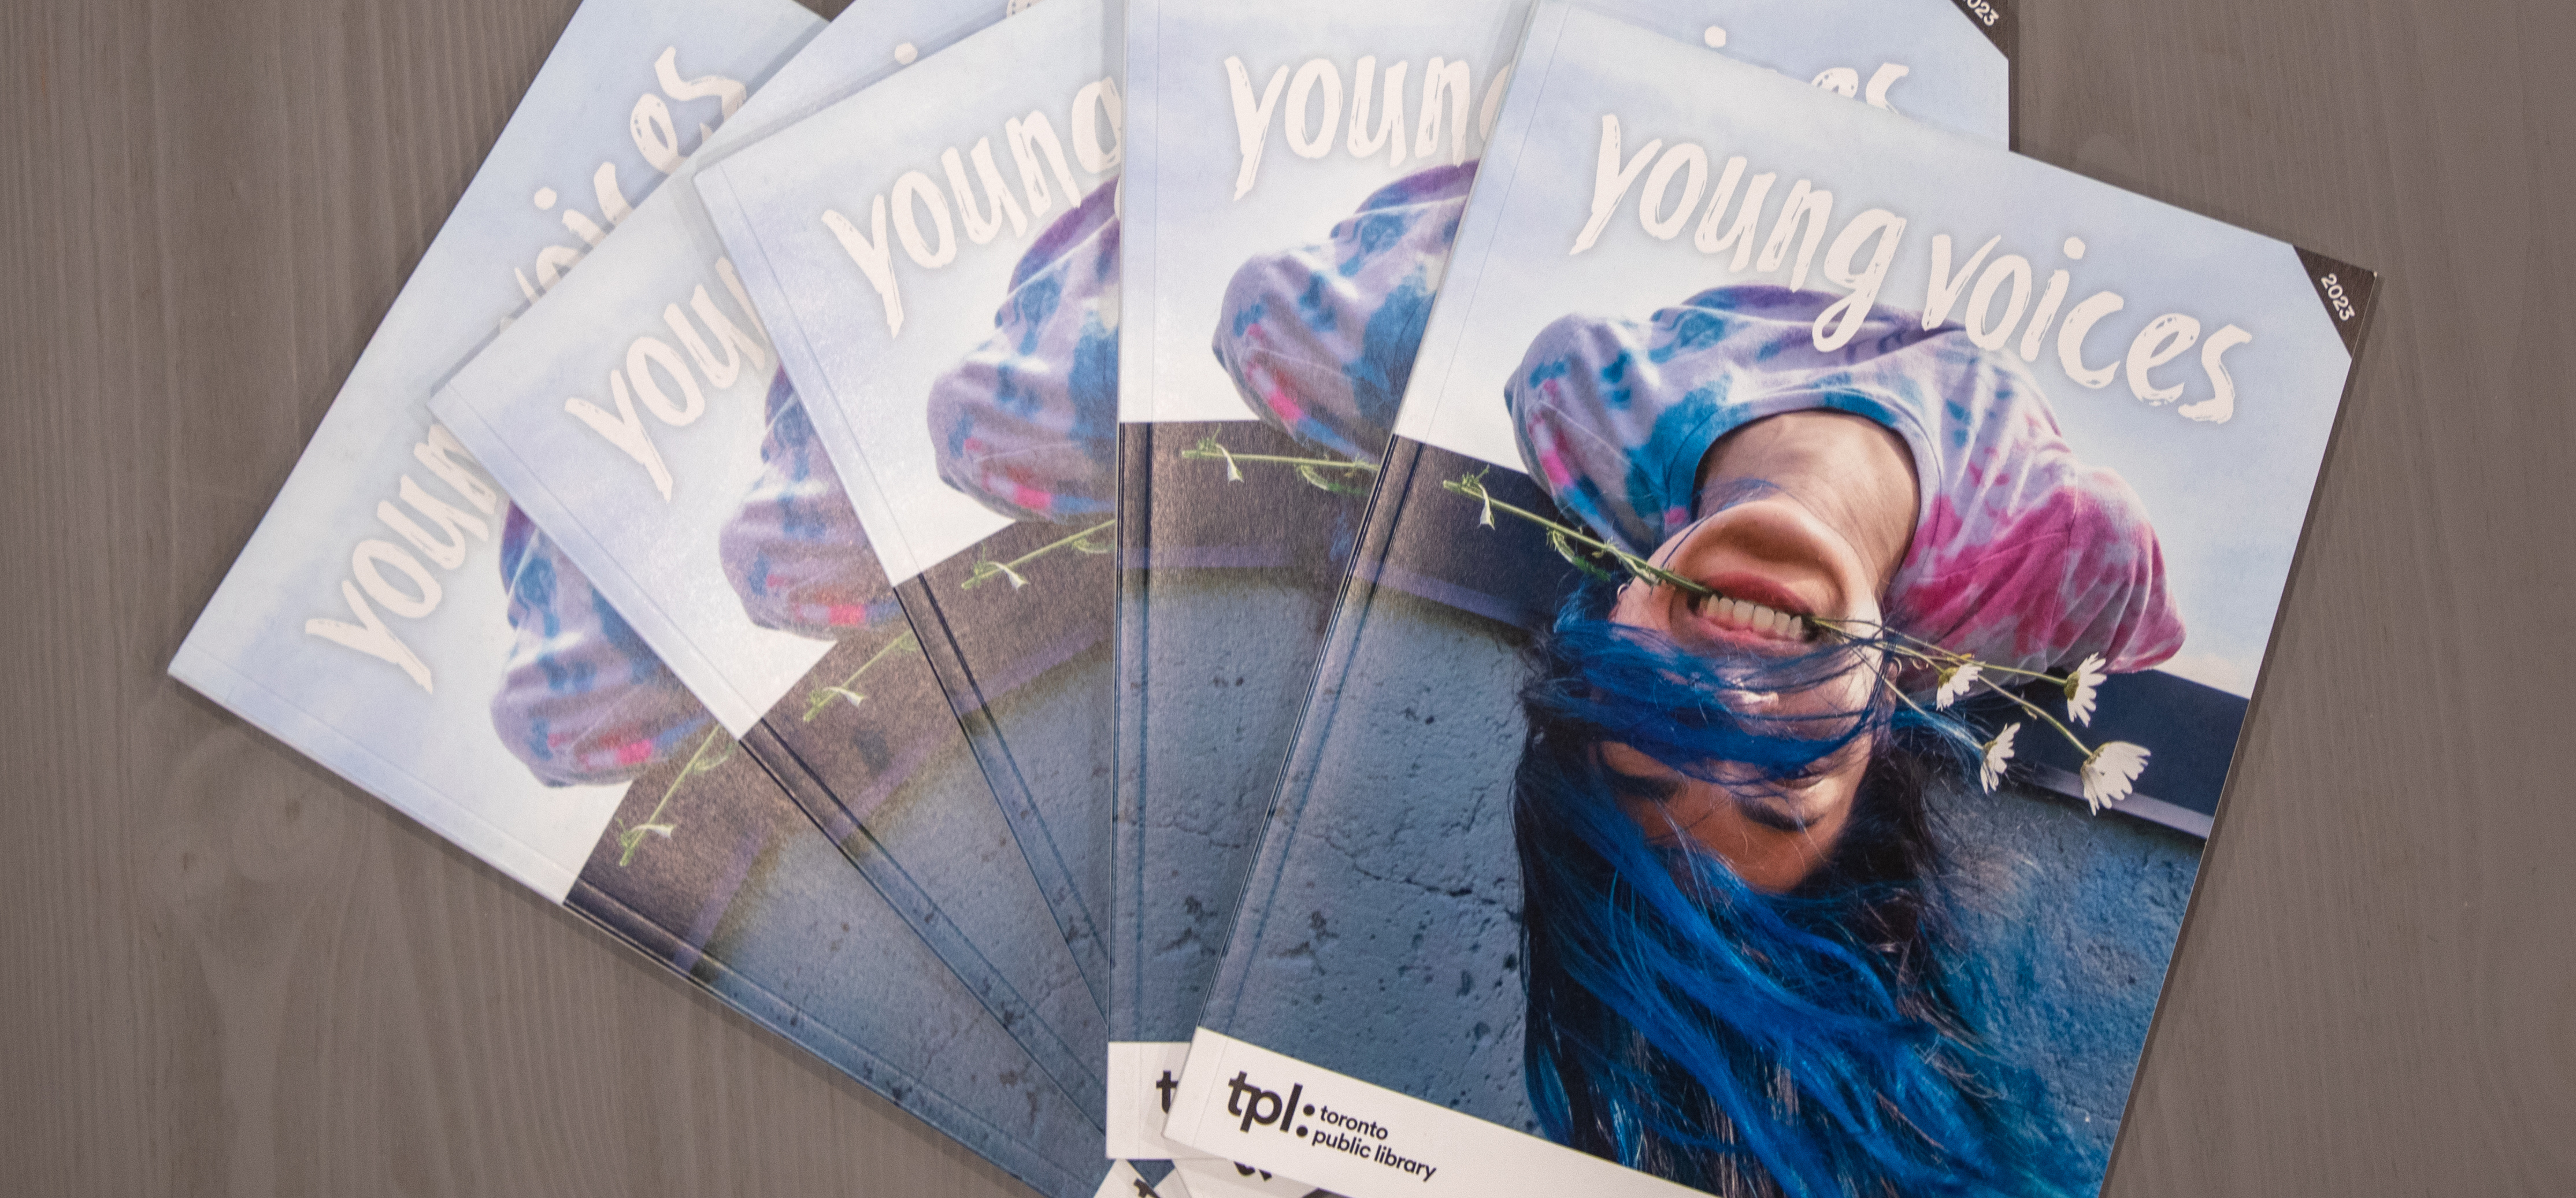 YCopies of Young Voices magazine fanned out